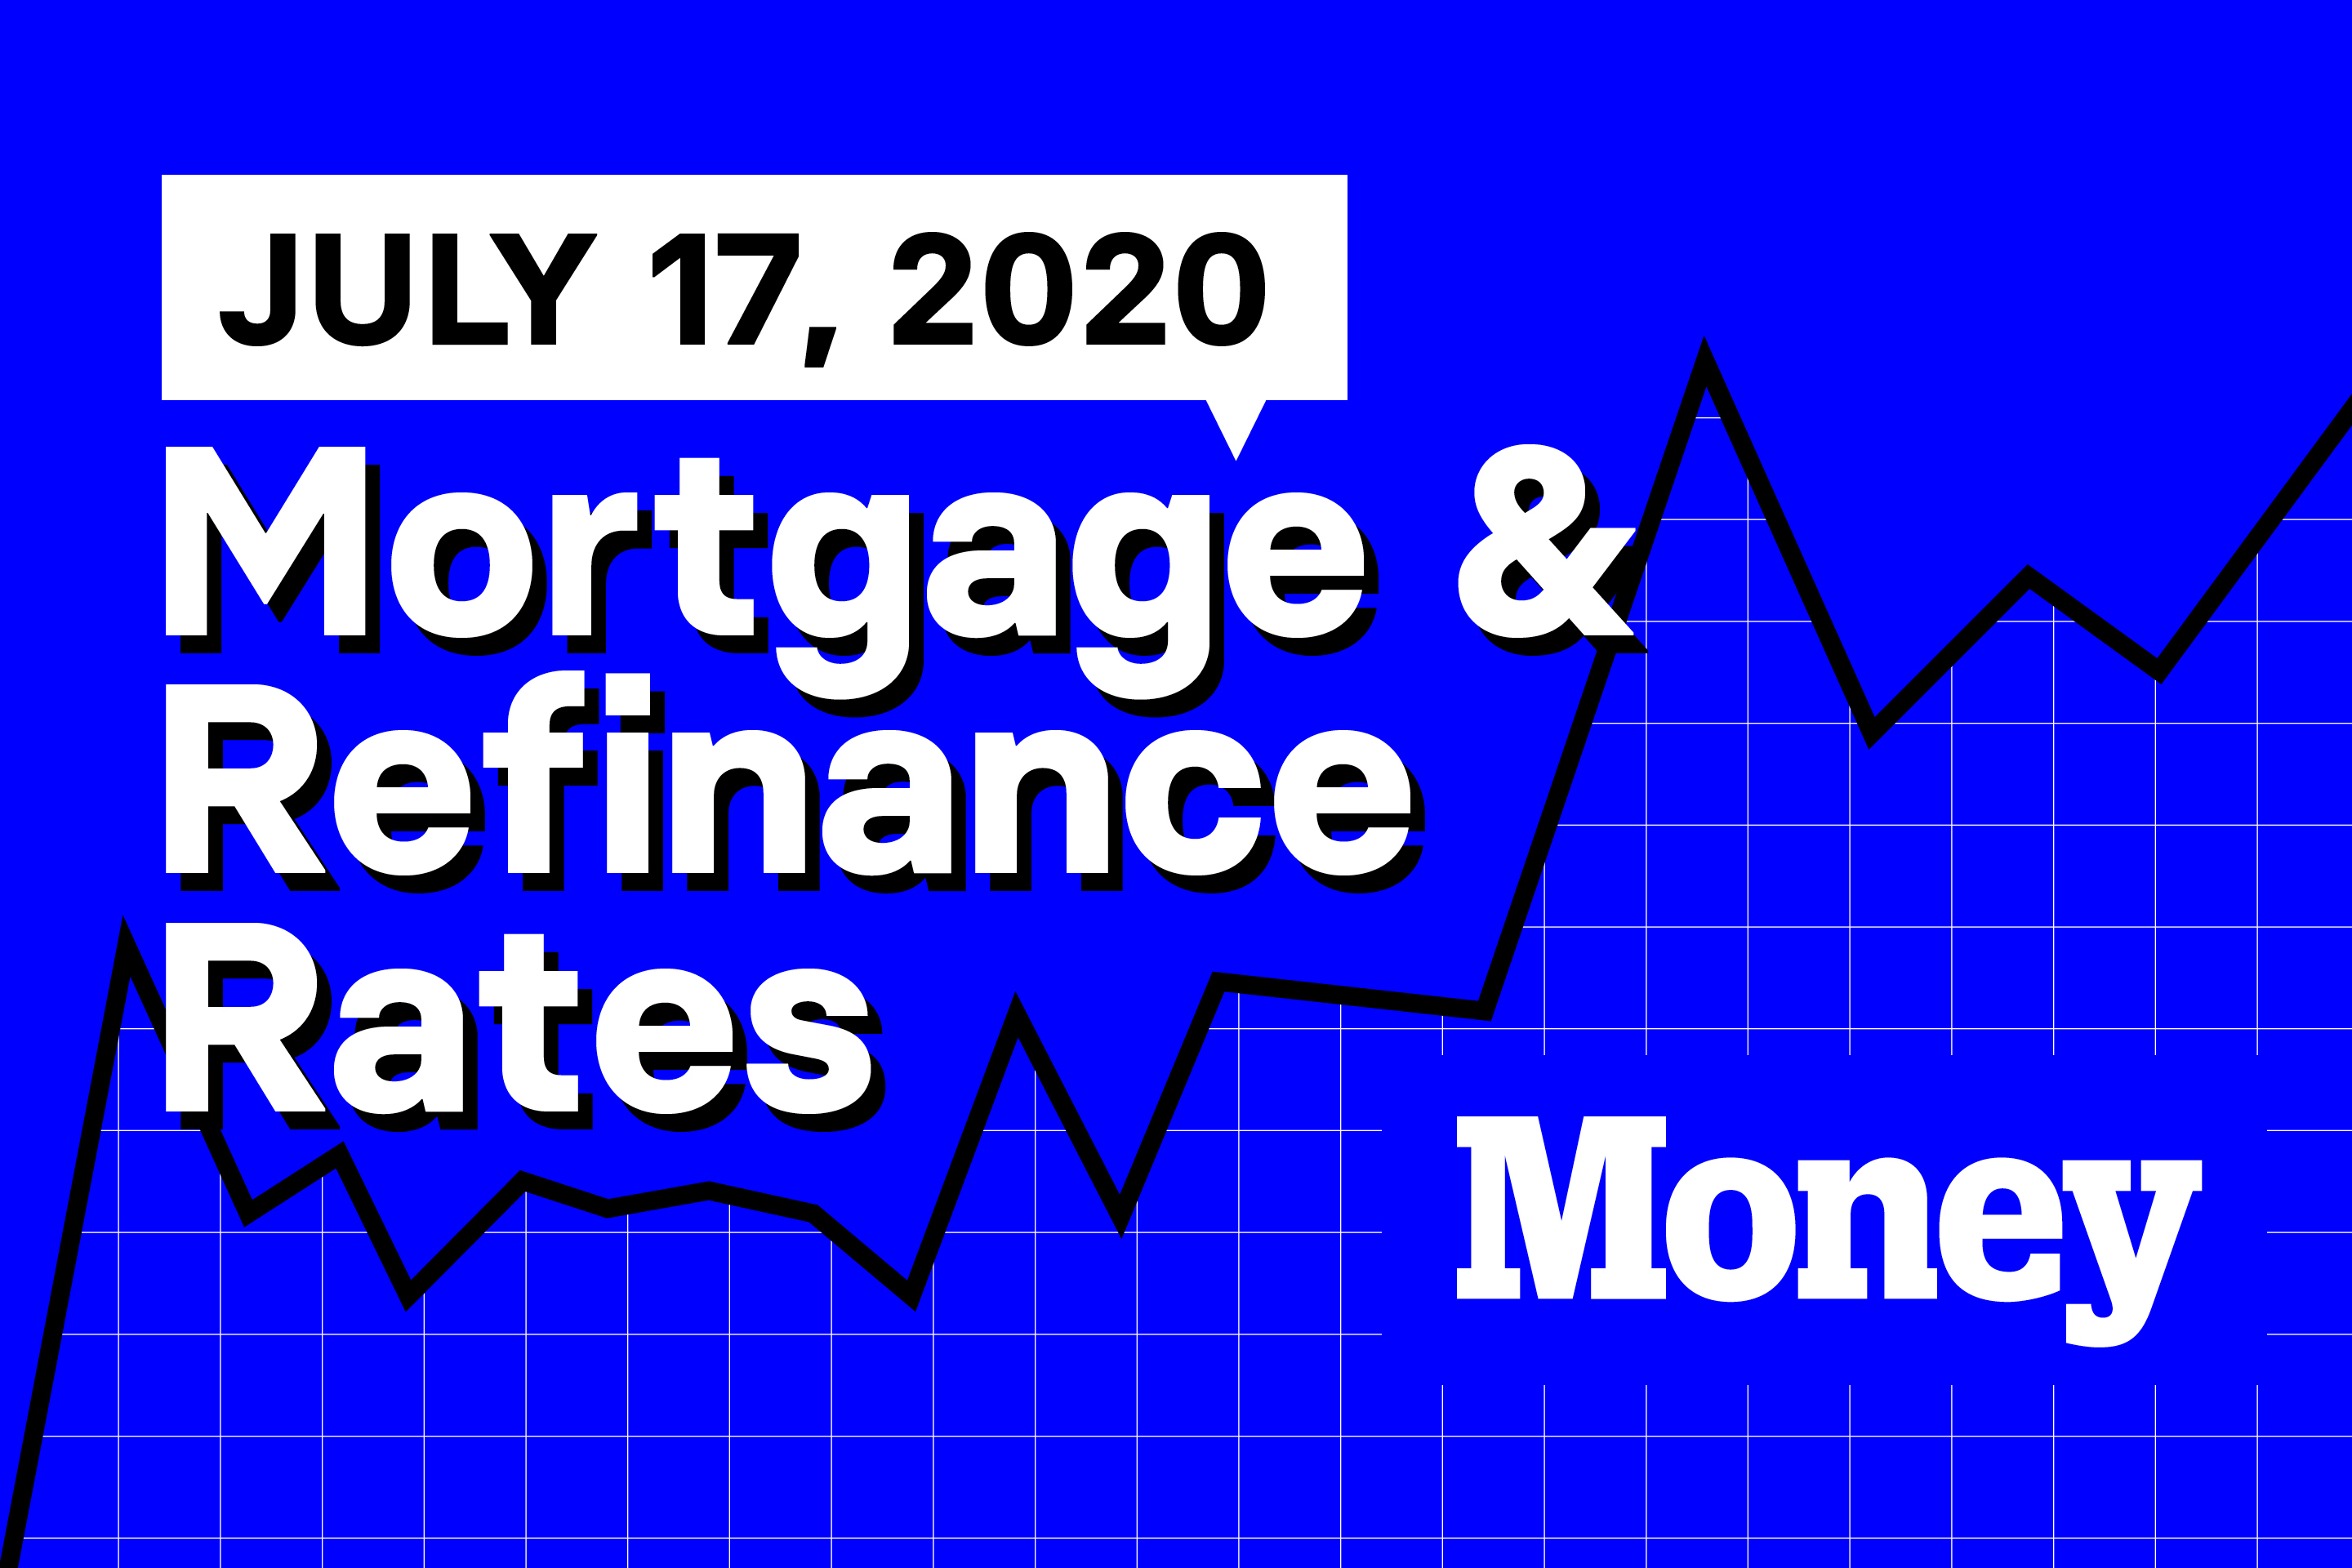 Here Are Today's Best Mortgage &amp; Refinance Rates for July 17, 2020